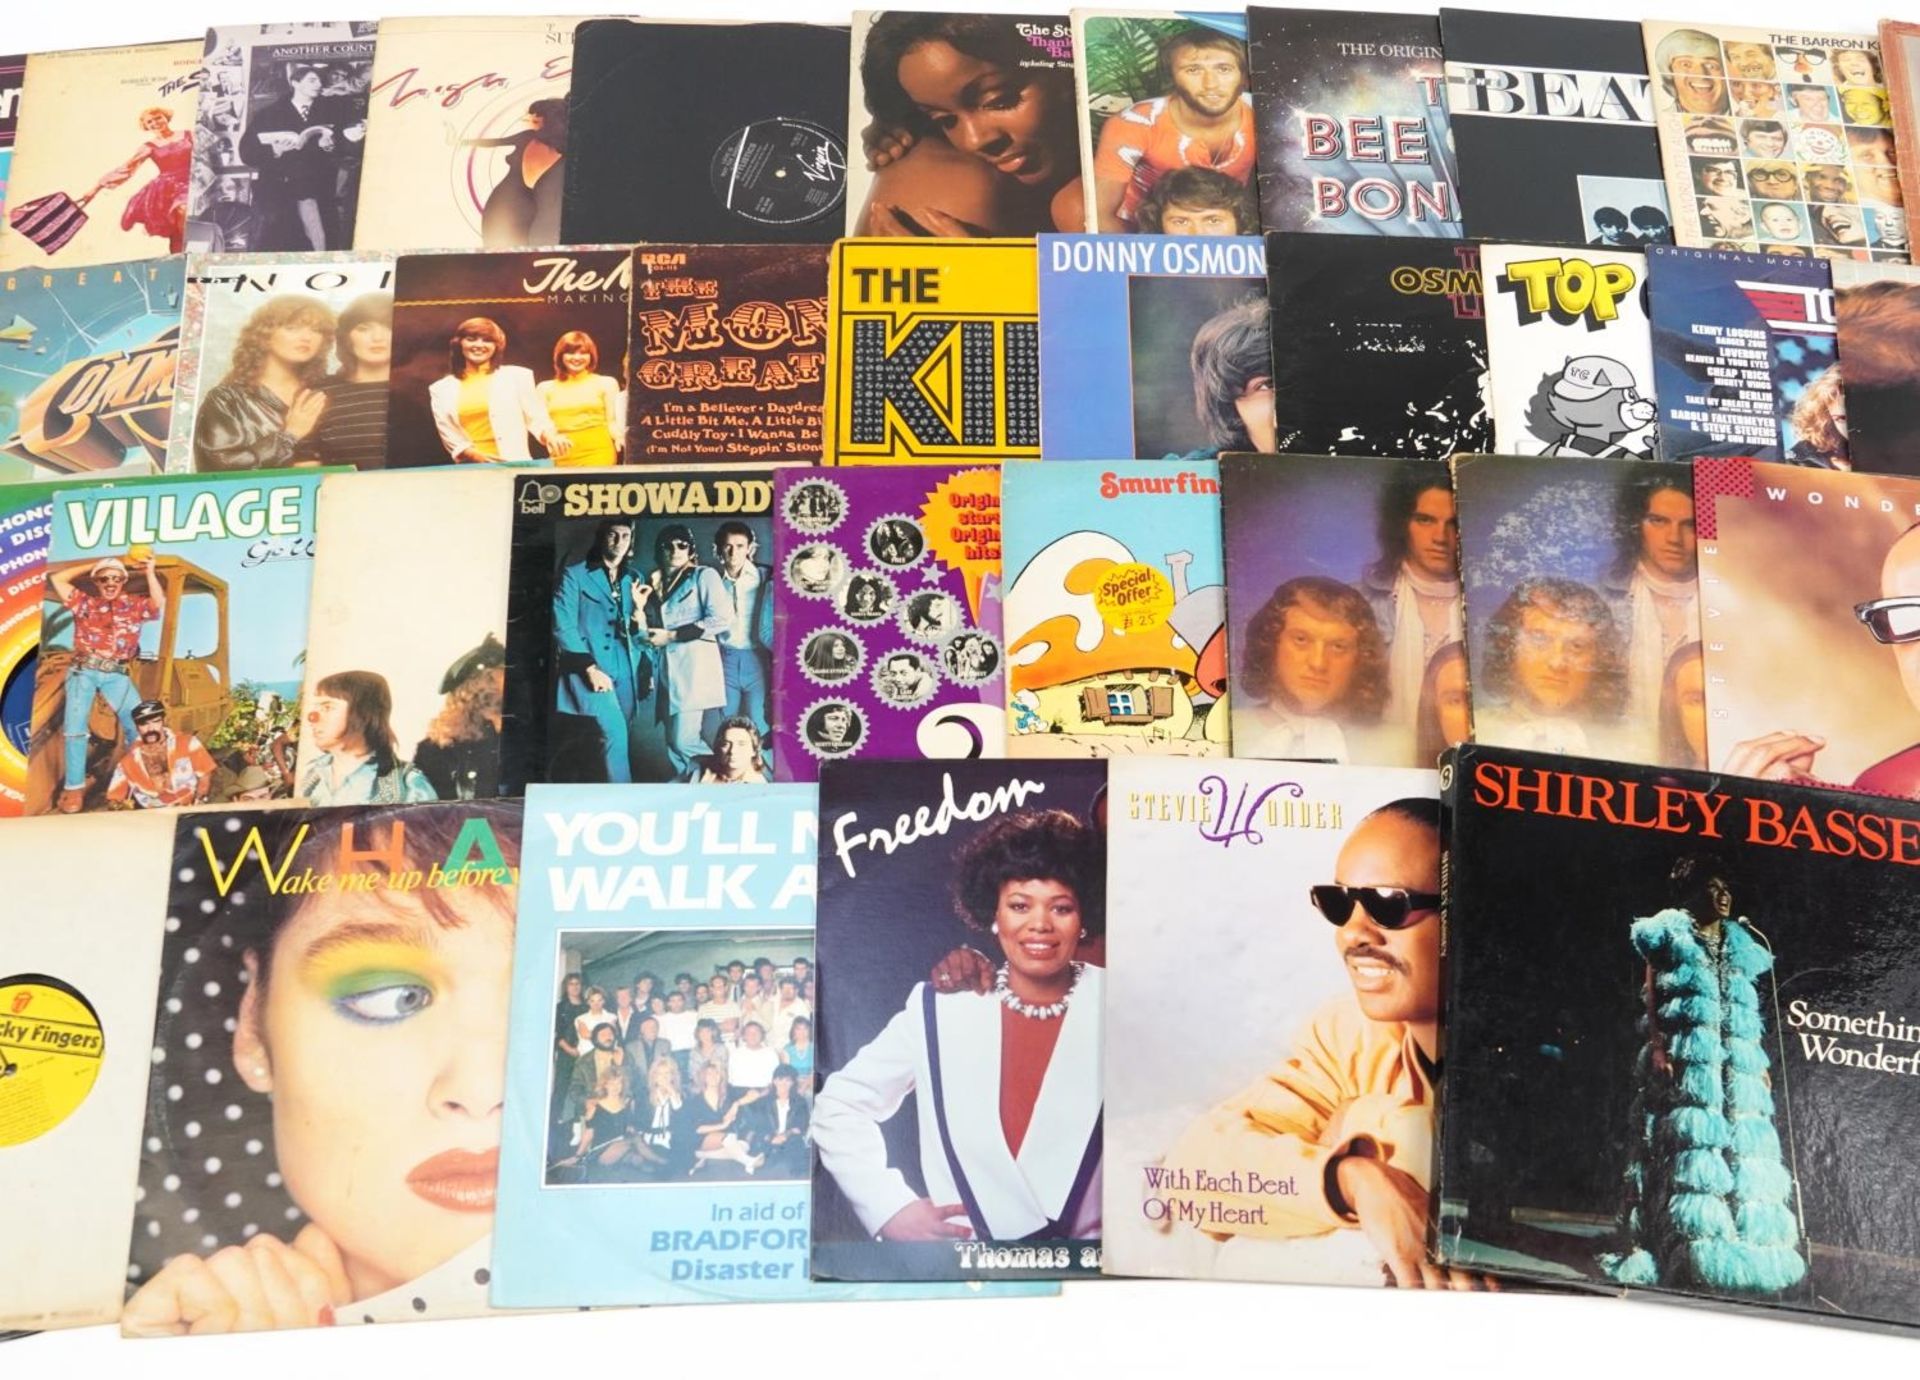 Vinyl LP records including Wings, Shakin' Stevens, Showaddywaddy, Stevie Wonder, The Jam and The - Image 3 of 4